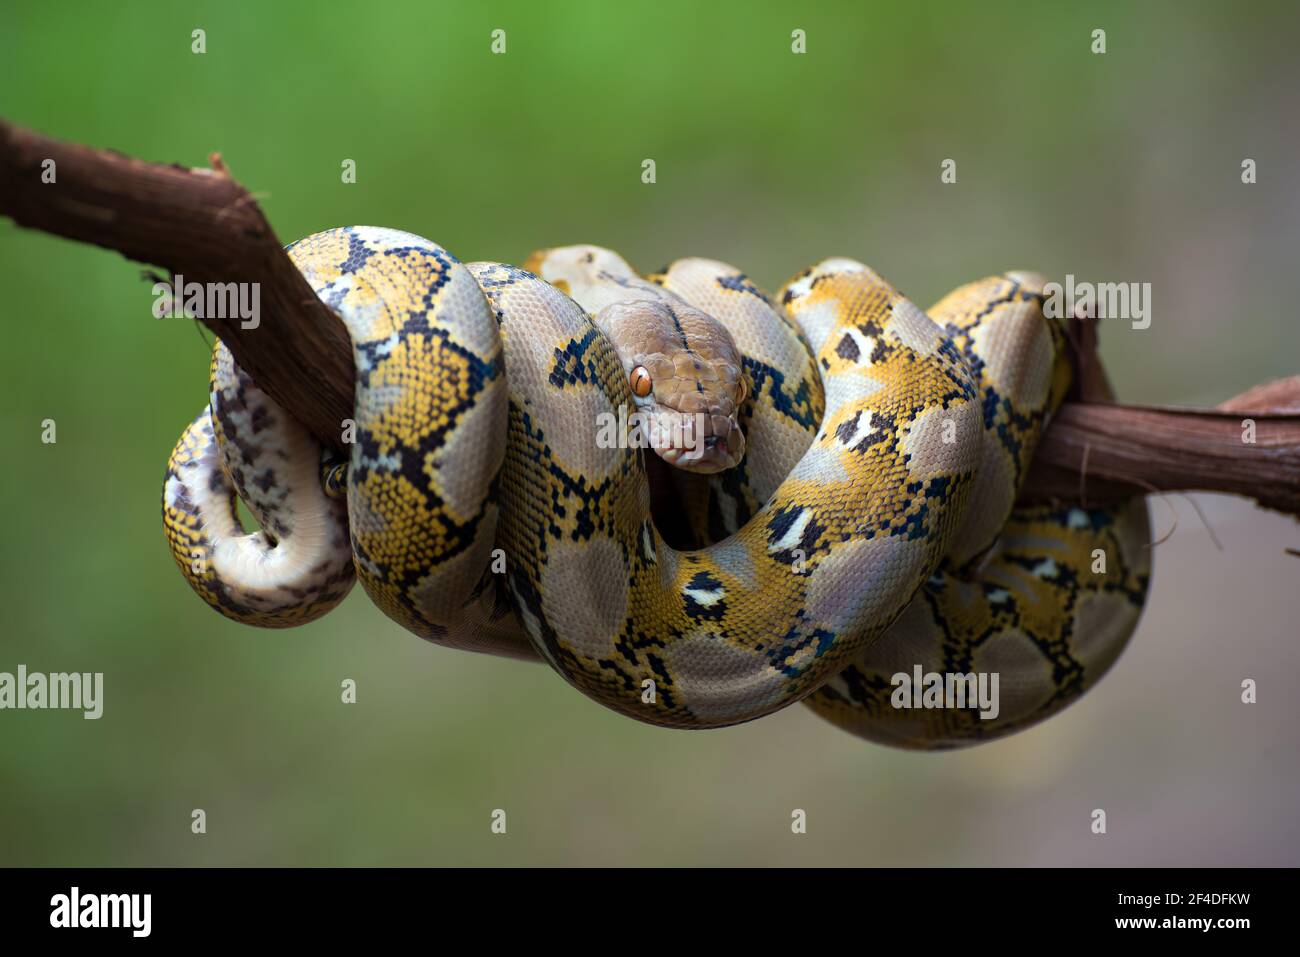 Reticulated python coiled around a tree branch, Indonesia Stock Photo